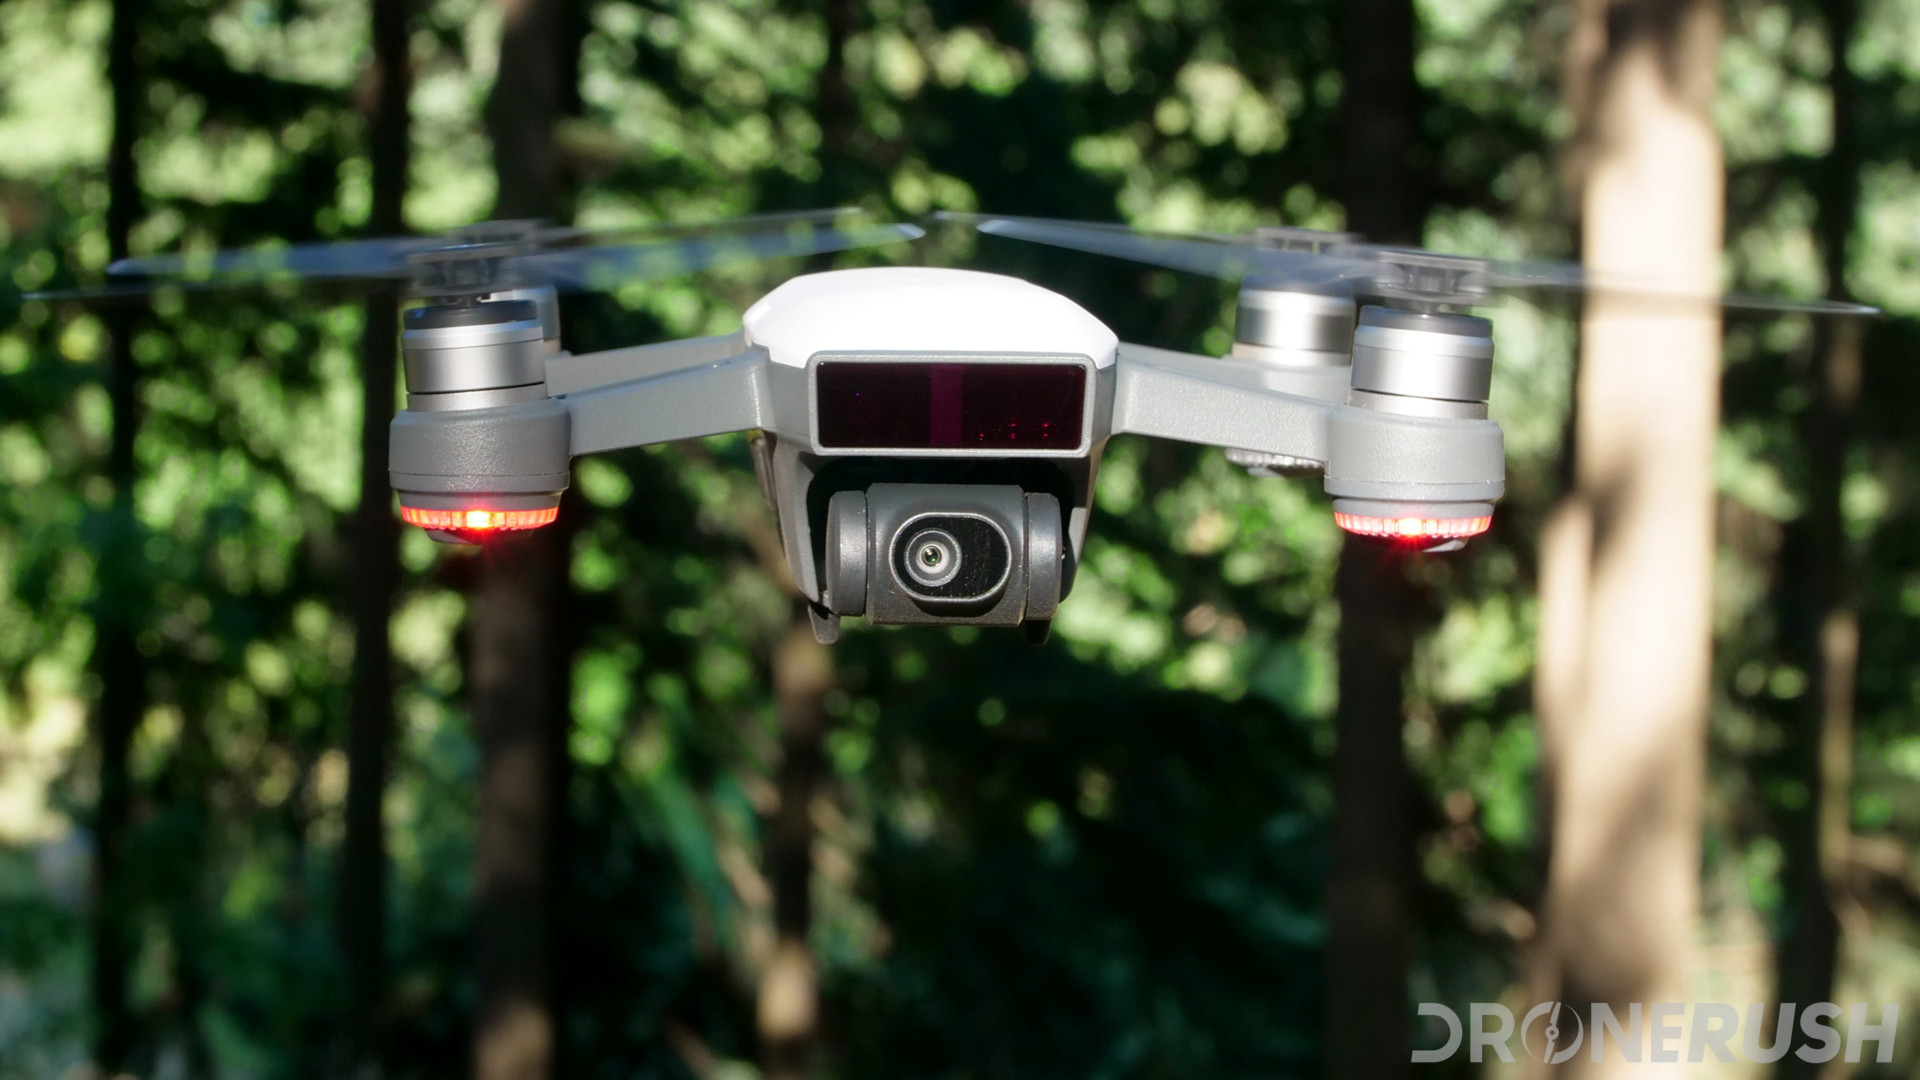 Image of a white DJI Spark hovering in front of trees, the drone is facing the camera so to show off the drone's camera, this is our DJI Spark camera review.